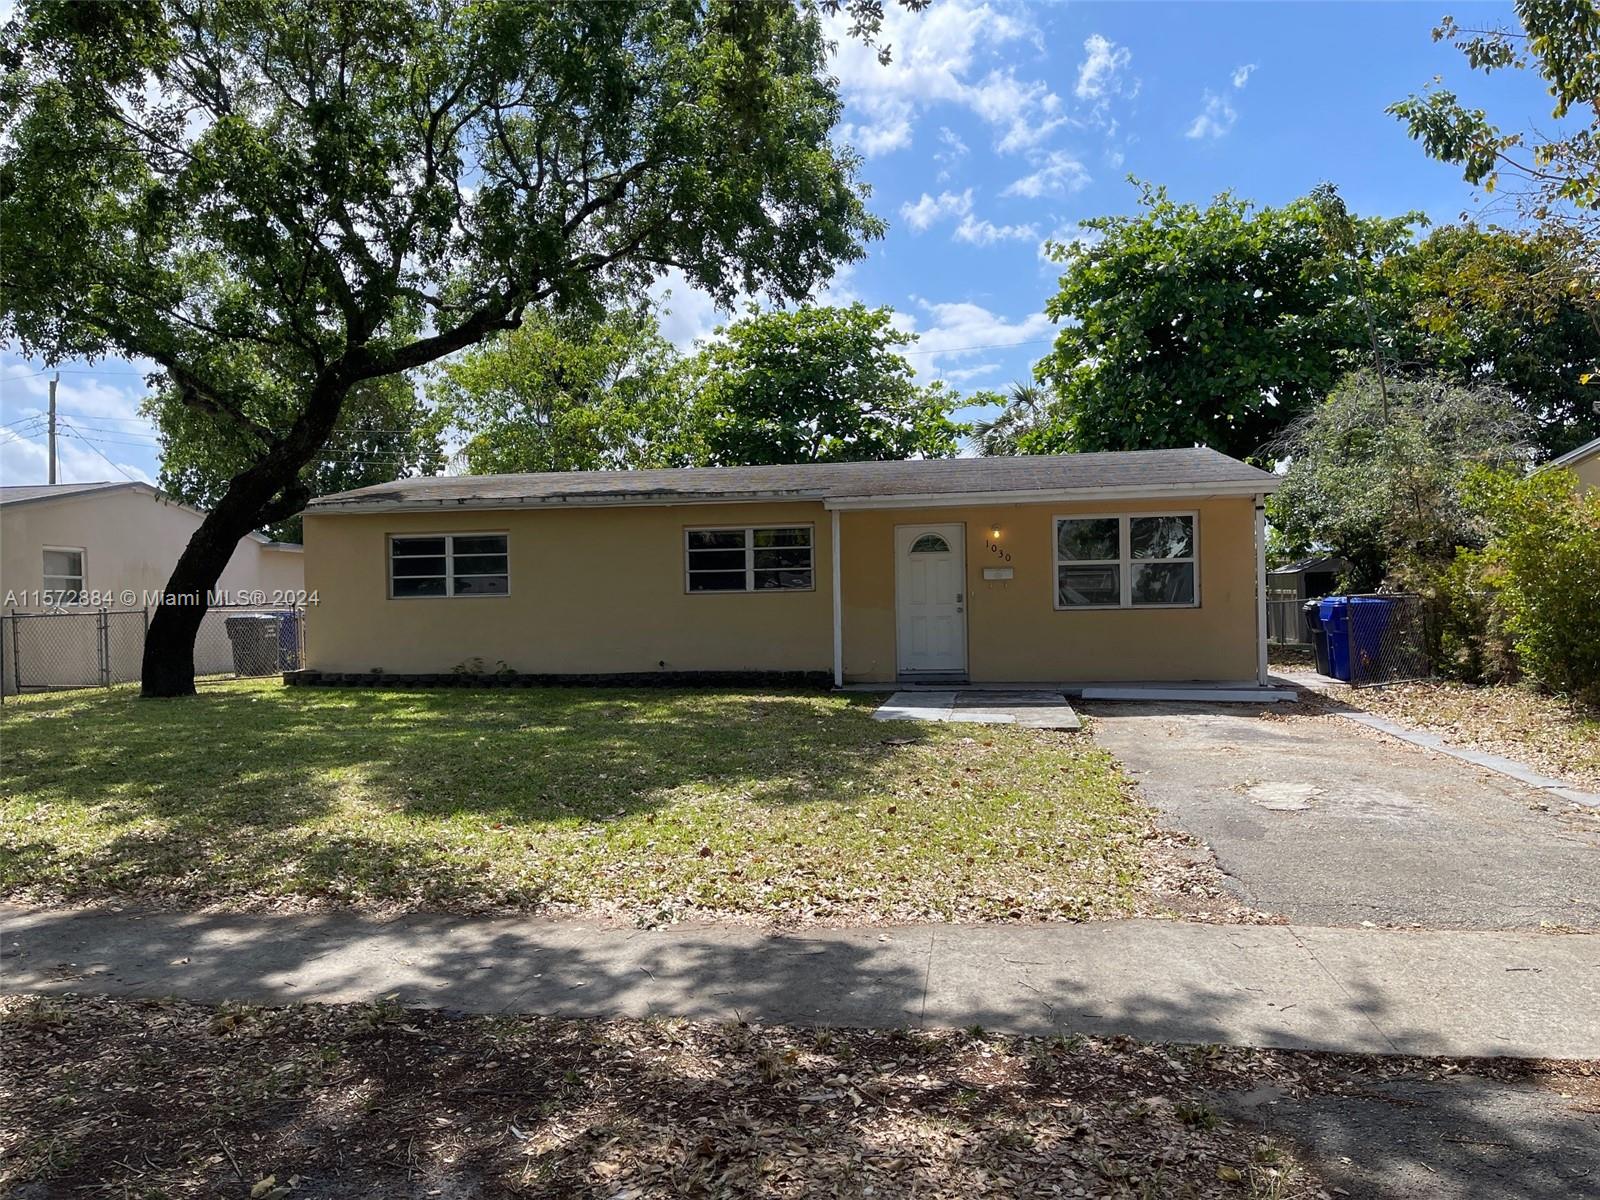 1030 N 70th Ave, Hollywood, Florida 33024, 3 Bedrooms Bedrooms, ,1 BathroomBathrooms,Residential,For Sale,1030 N 70th Ave,A11572884